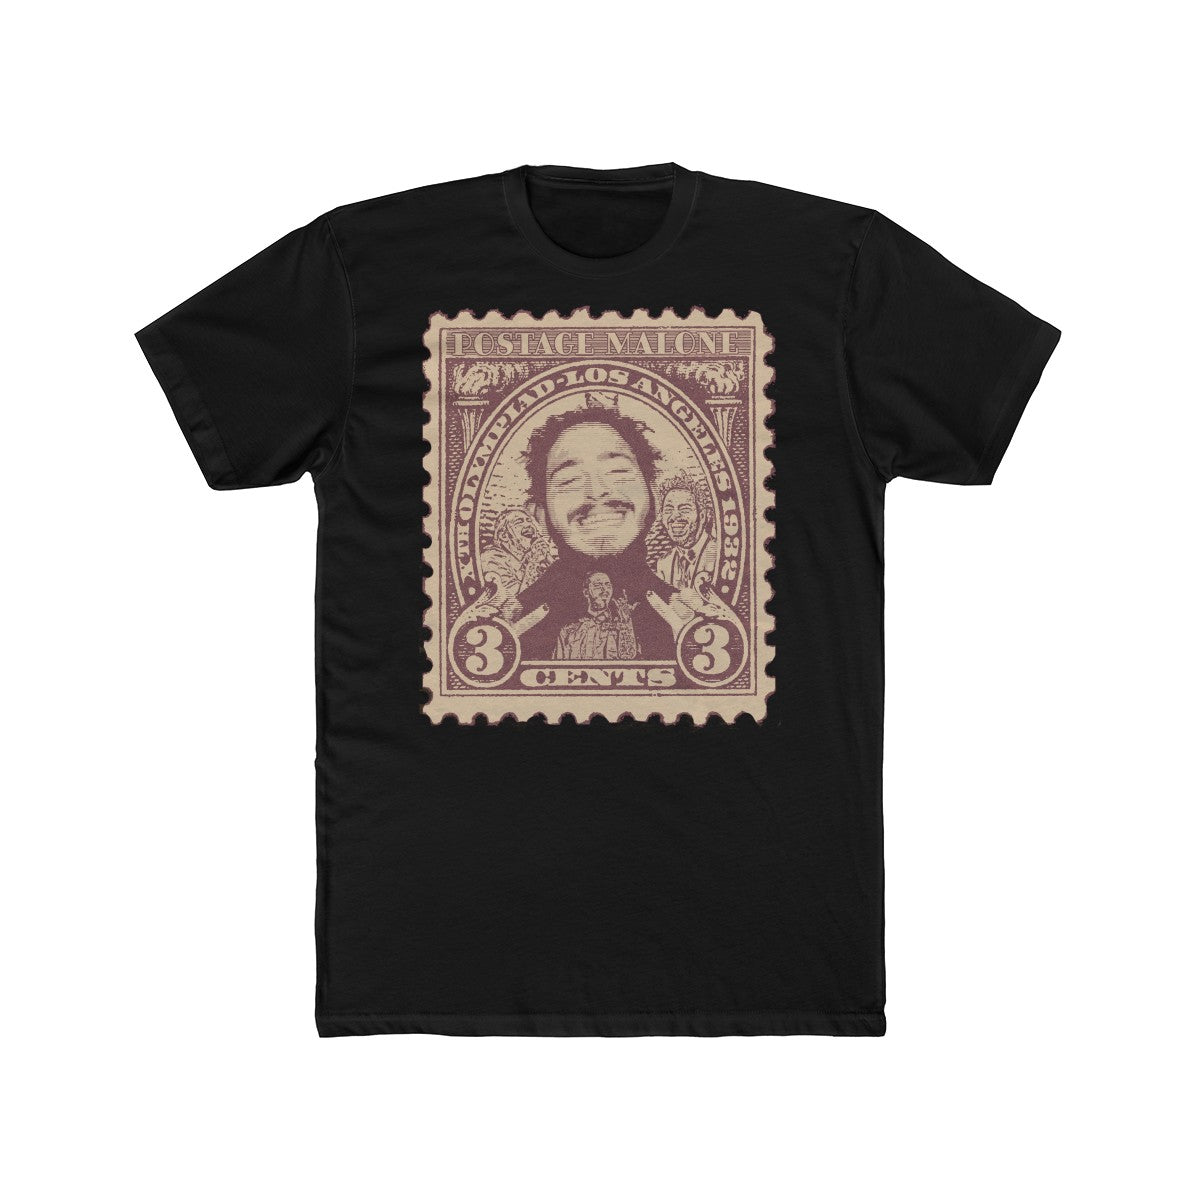 Postage Malone ( Post Malone ) Funny Old Stamp Collage Tee